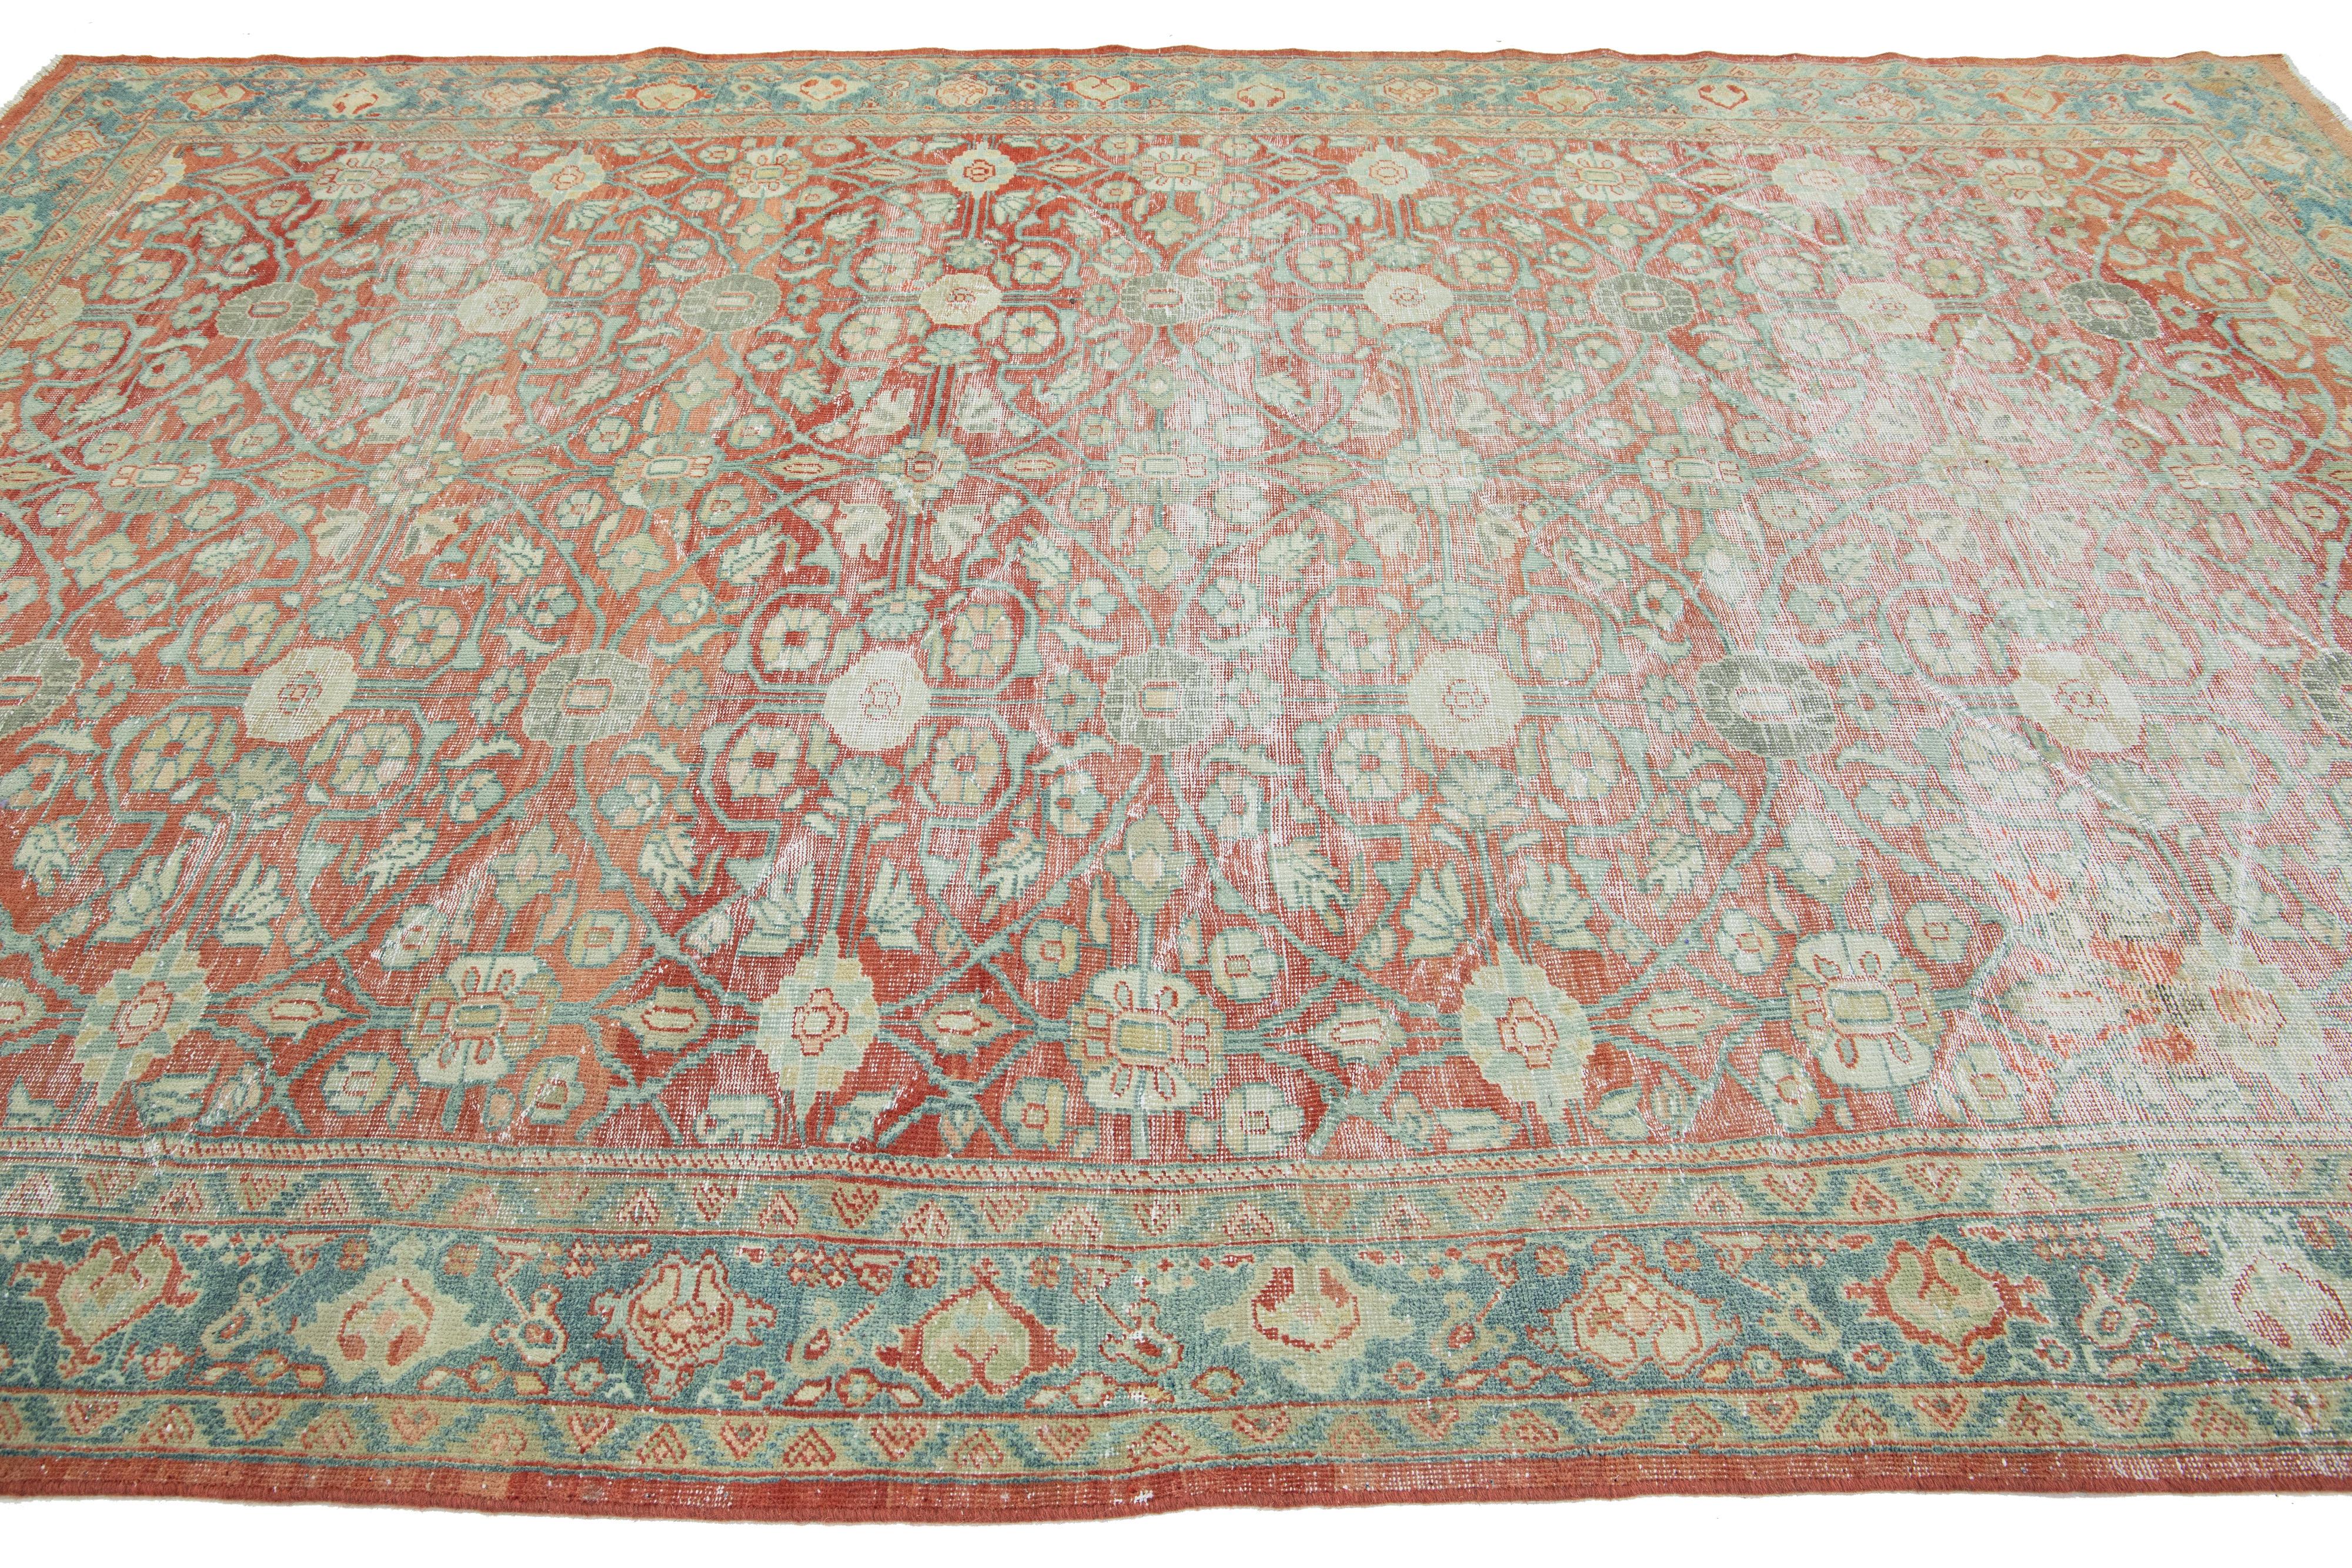 Allover Designed 1920s Antique Tabriz wool Rug In Red In Good Condition For Sale In Norwalk, CT